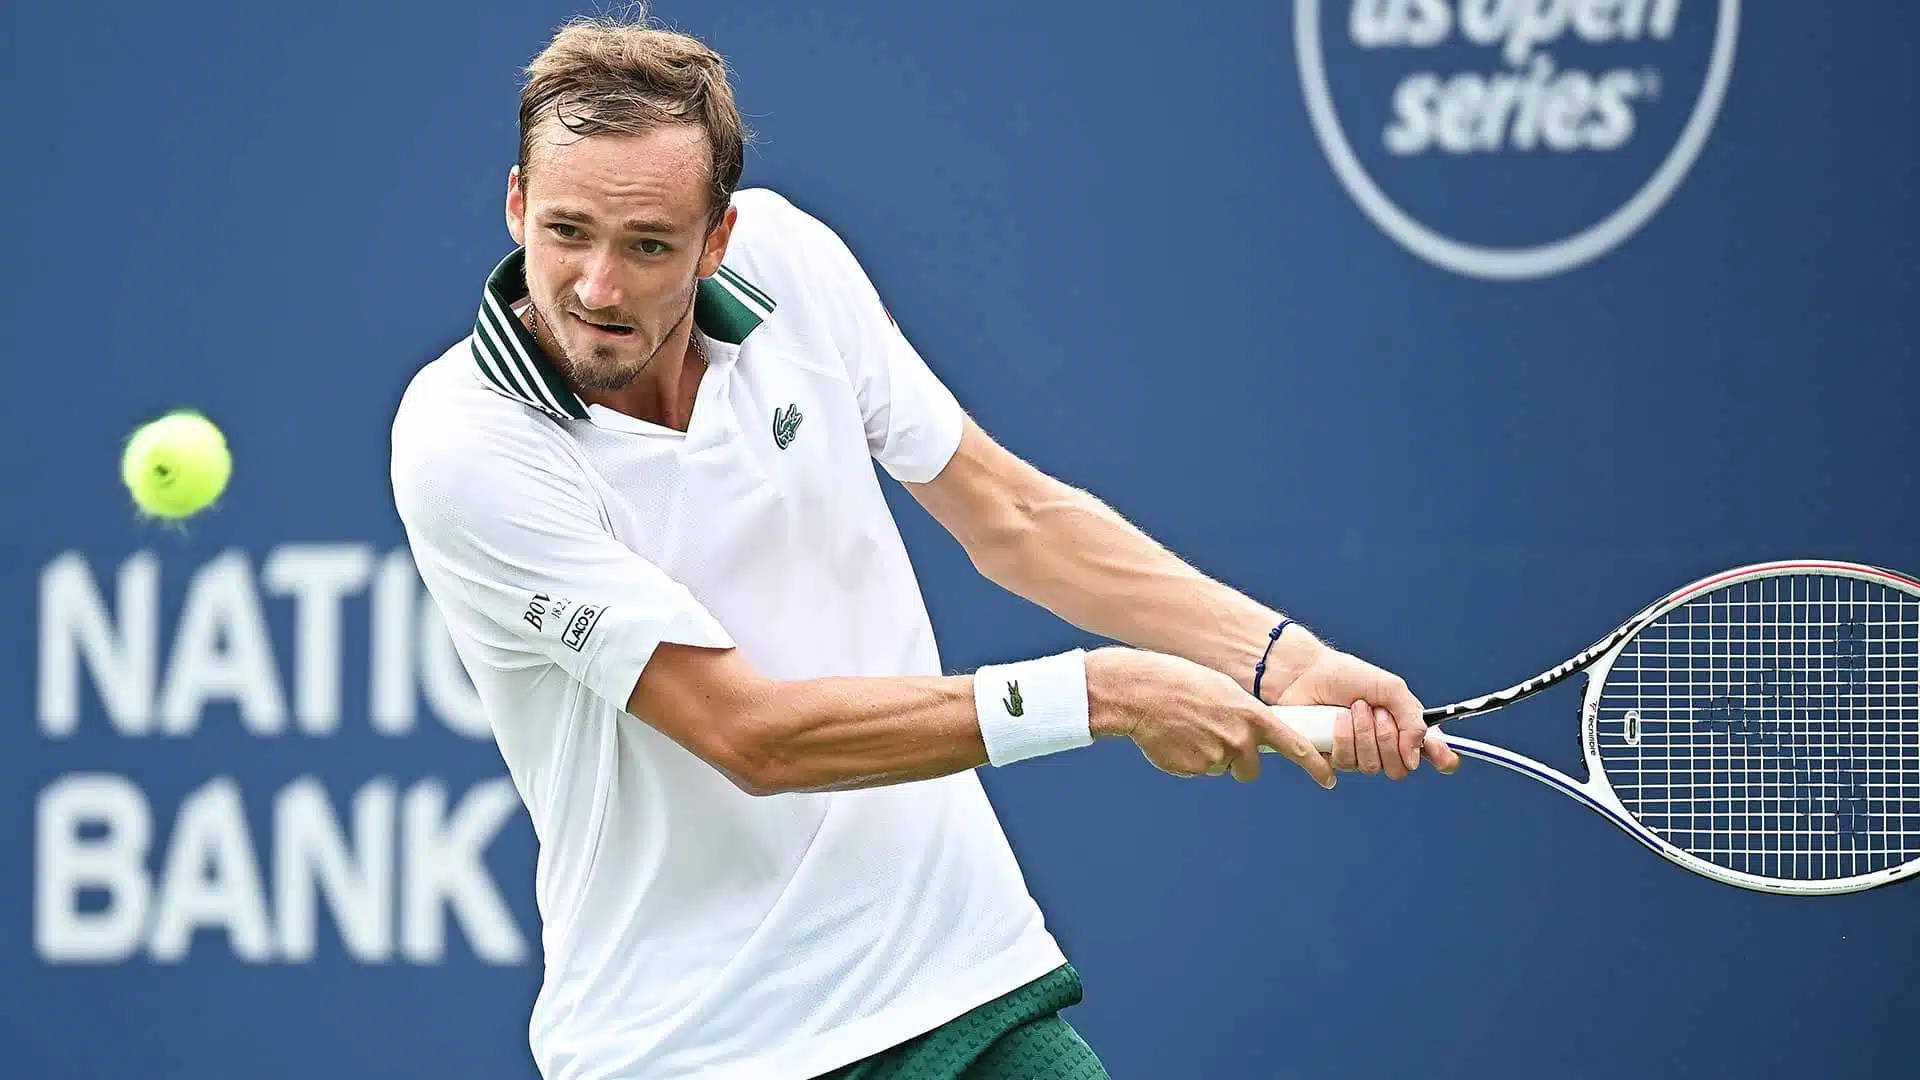 Daniil Medvedev Competes In A Professional Tennis Match.